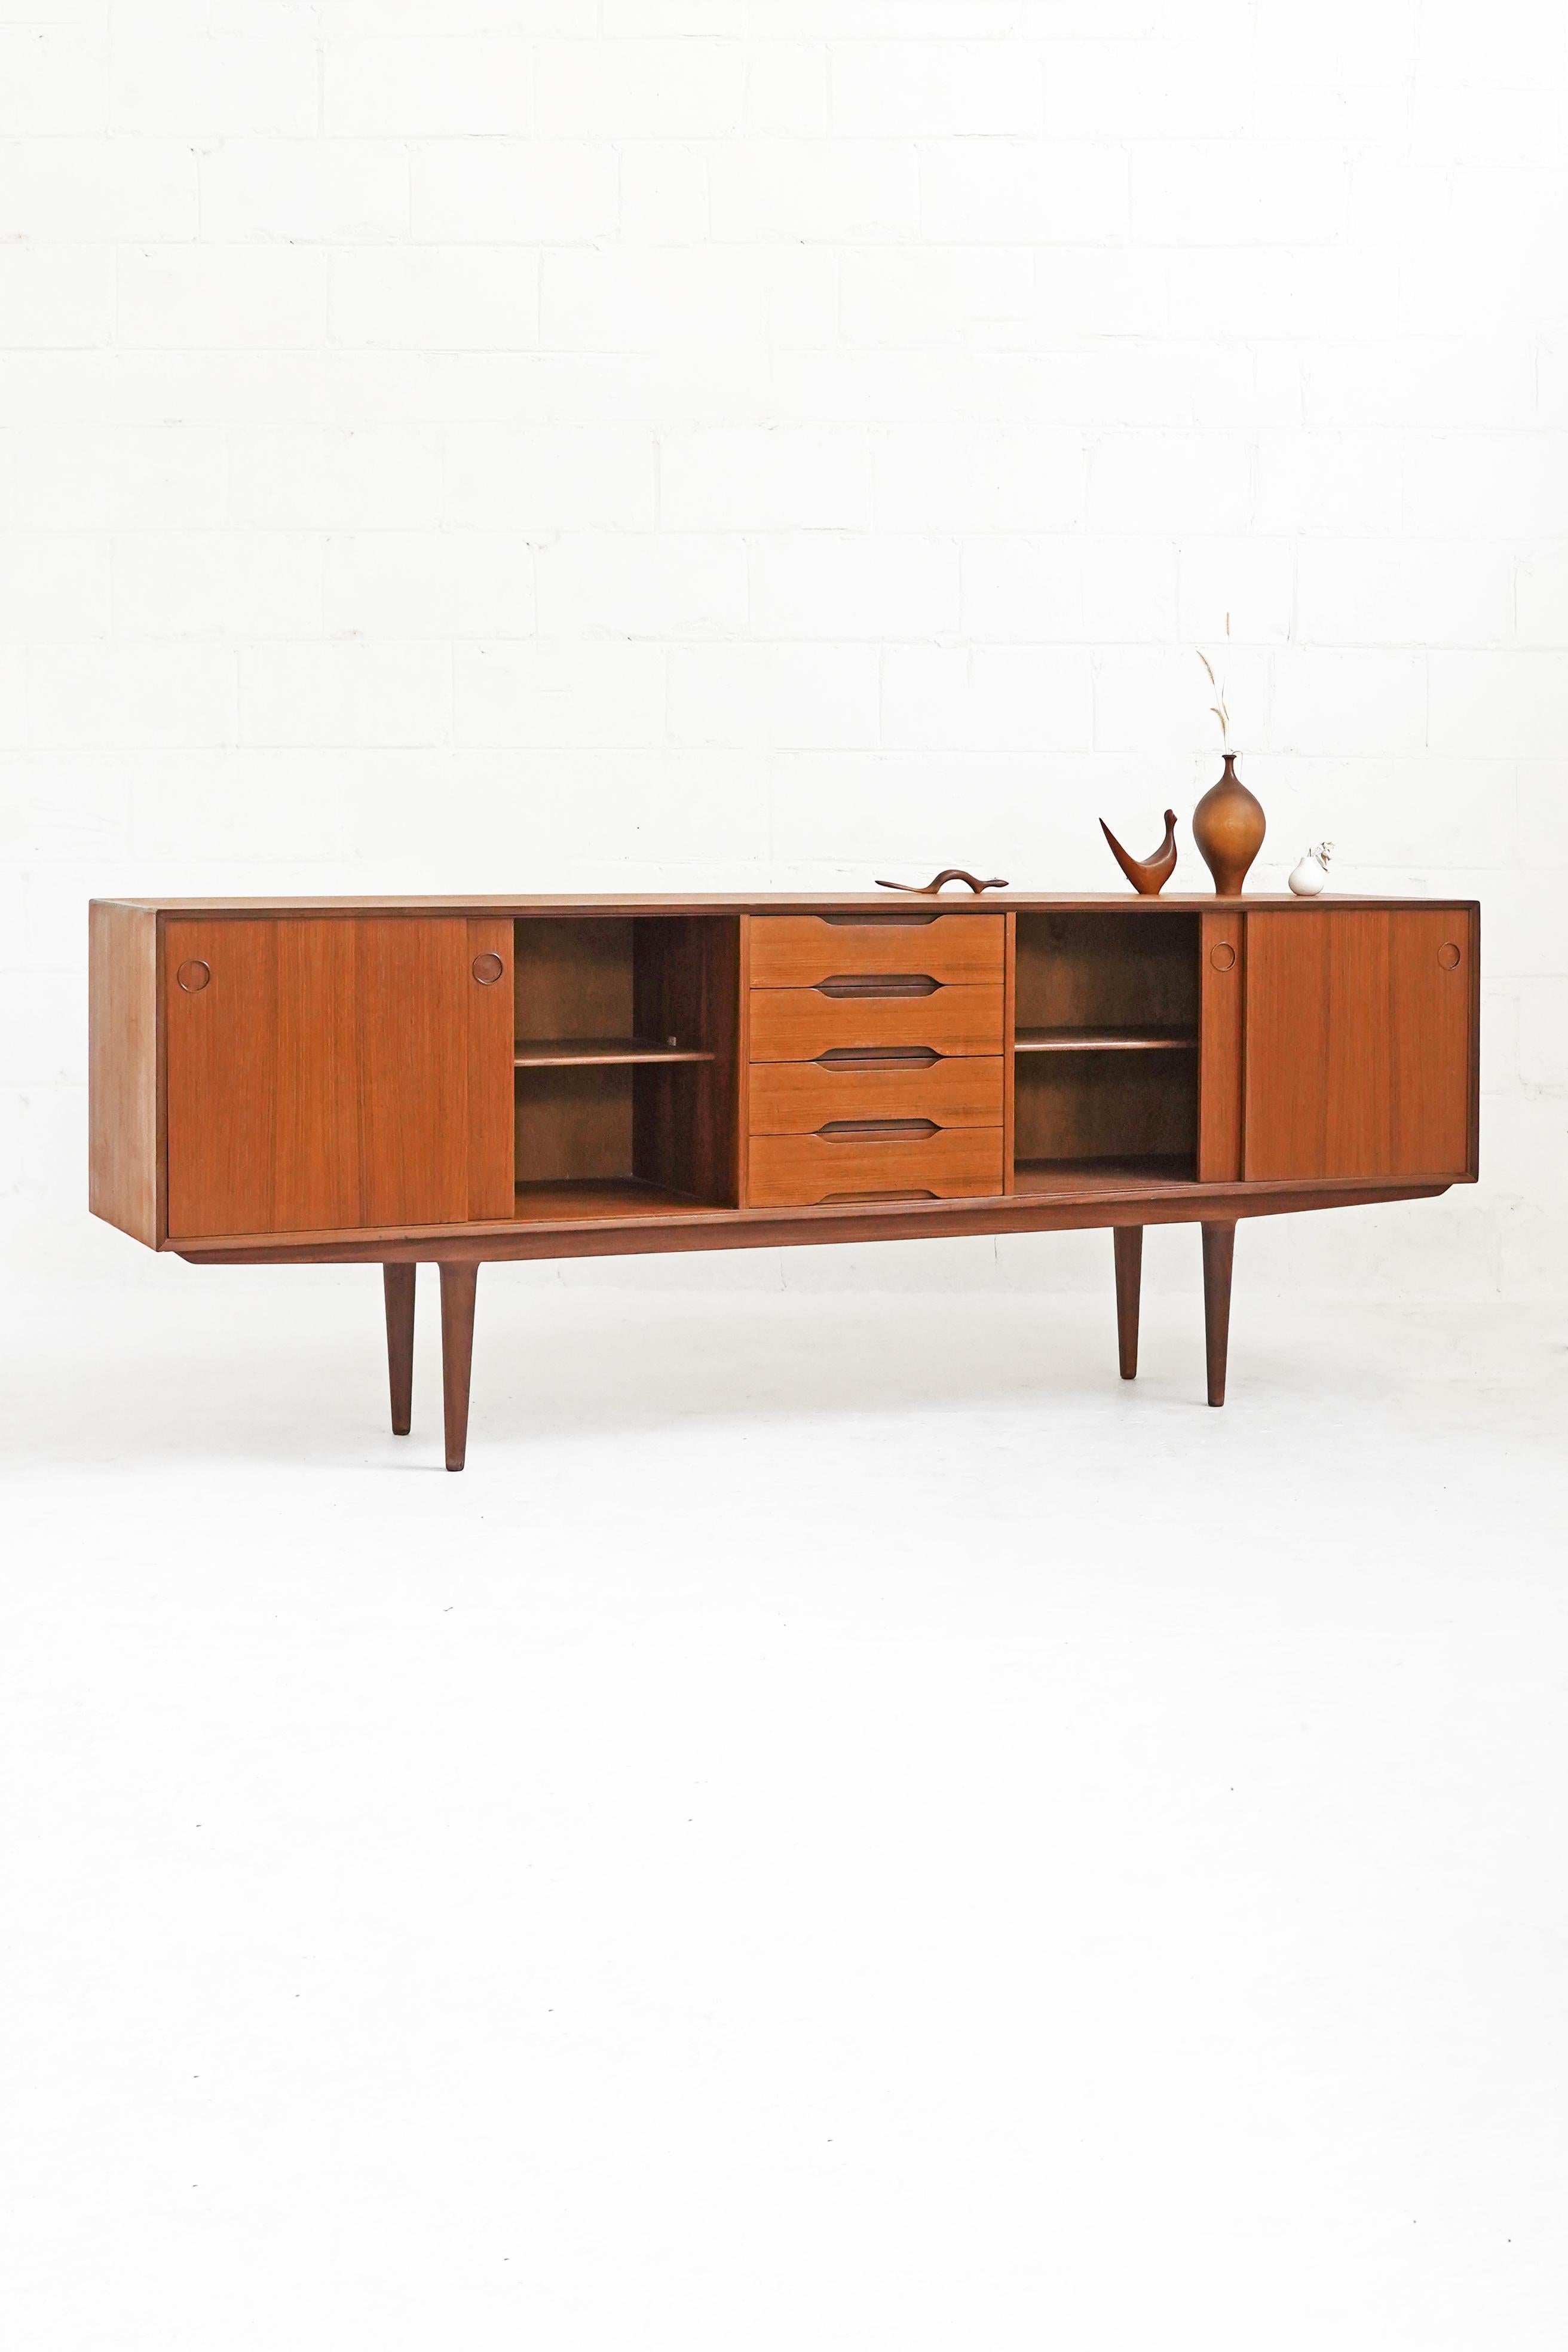 Beautiful teak sideboard by Fredrik Kayser, featuring gorgeous rich teak grain on top, front and side surfaces, with subtle and fine detailing throughout. A great piece in overall good vintage condition.